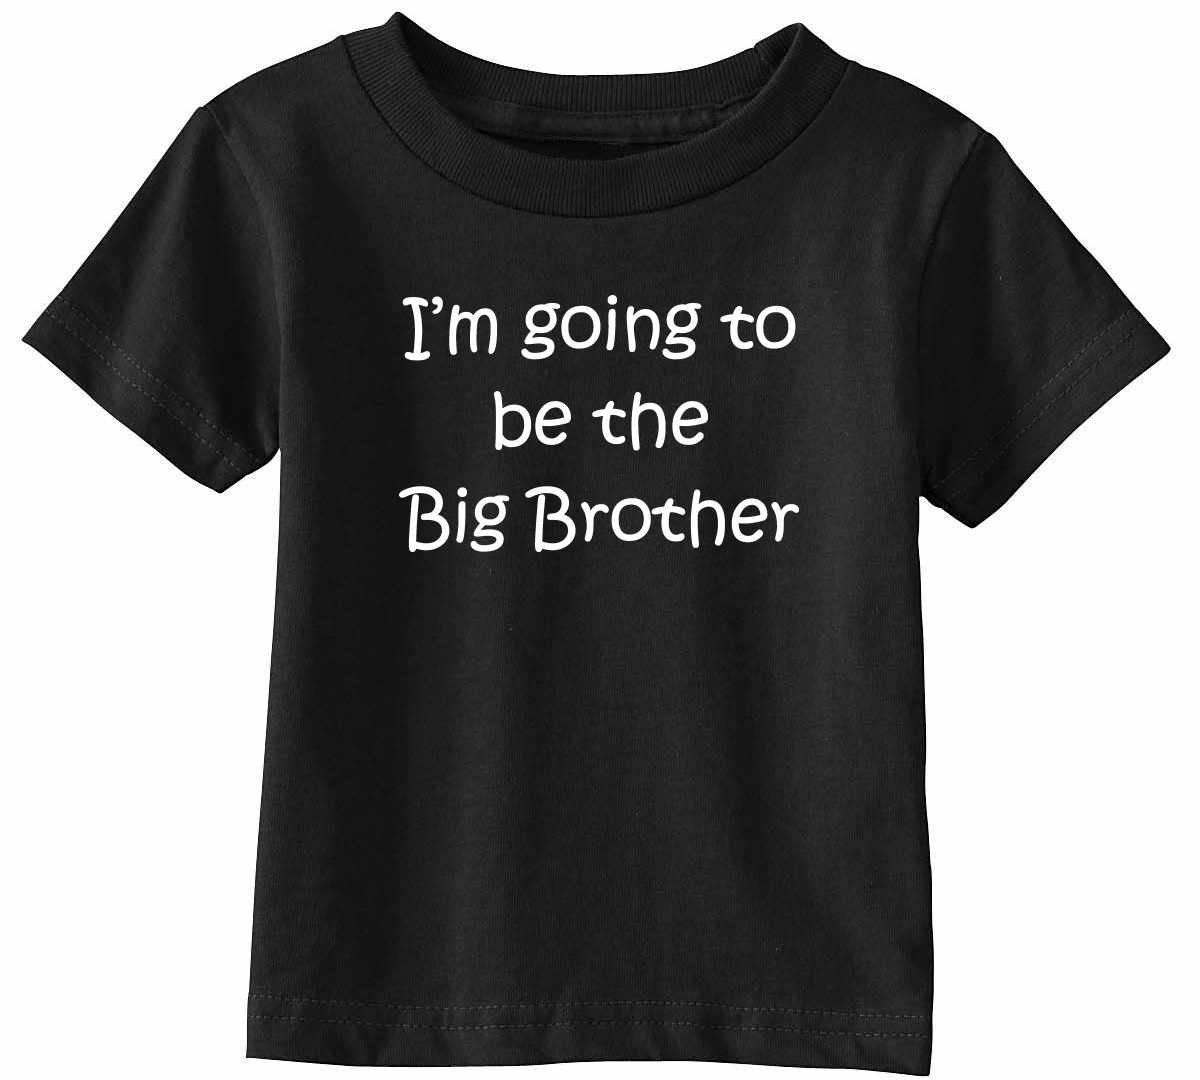 I'M GOING TO BE THE BIG BROTHER Infant/Toddler 